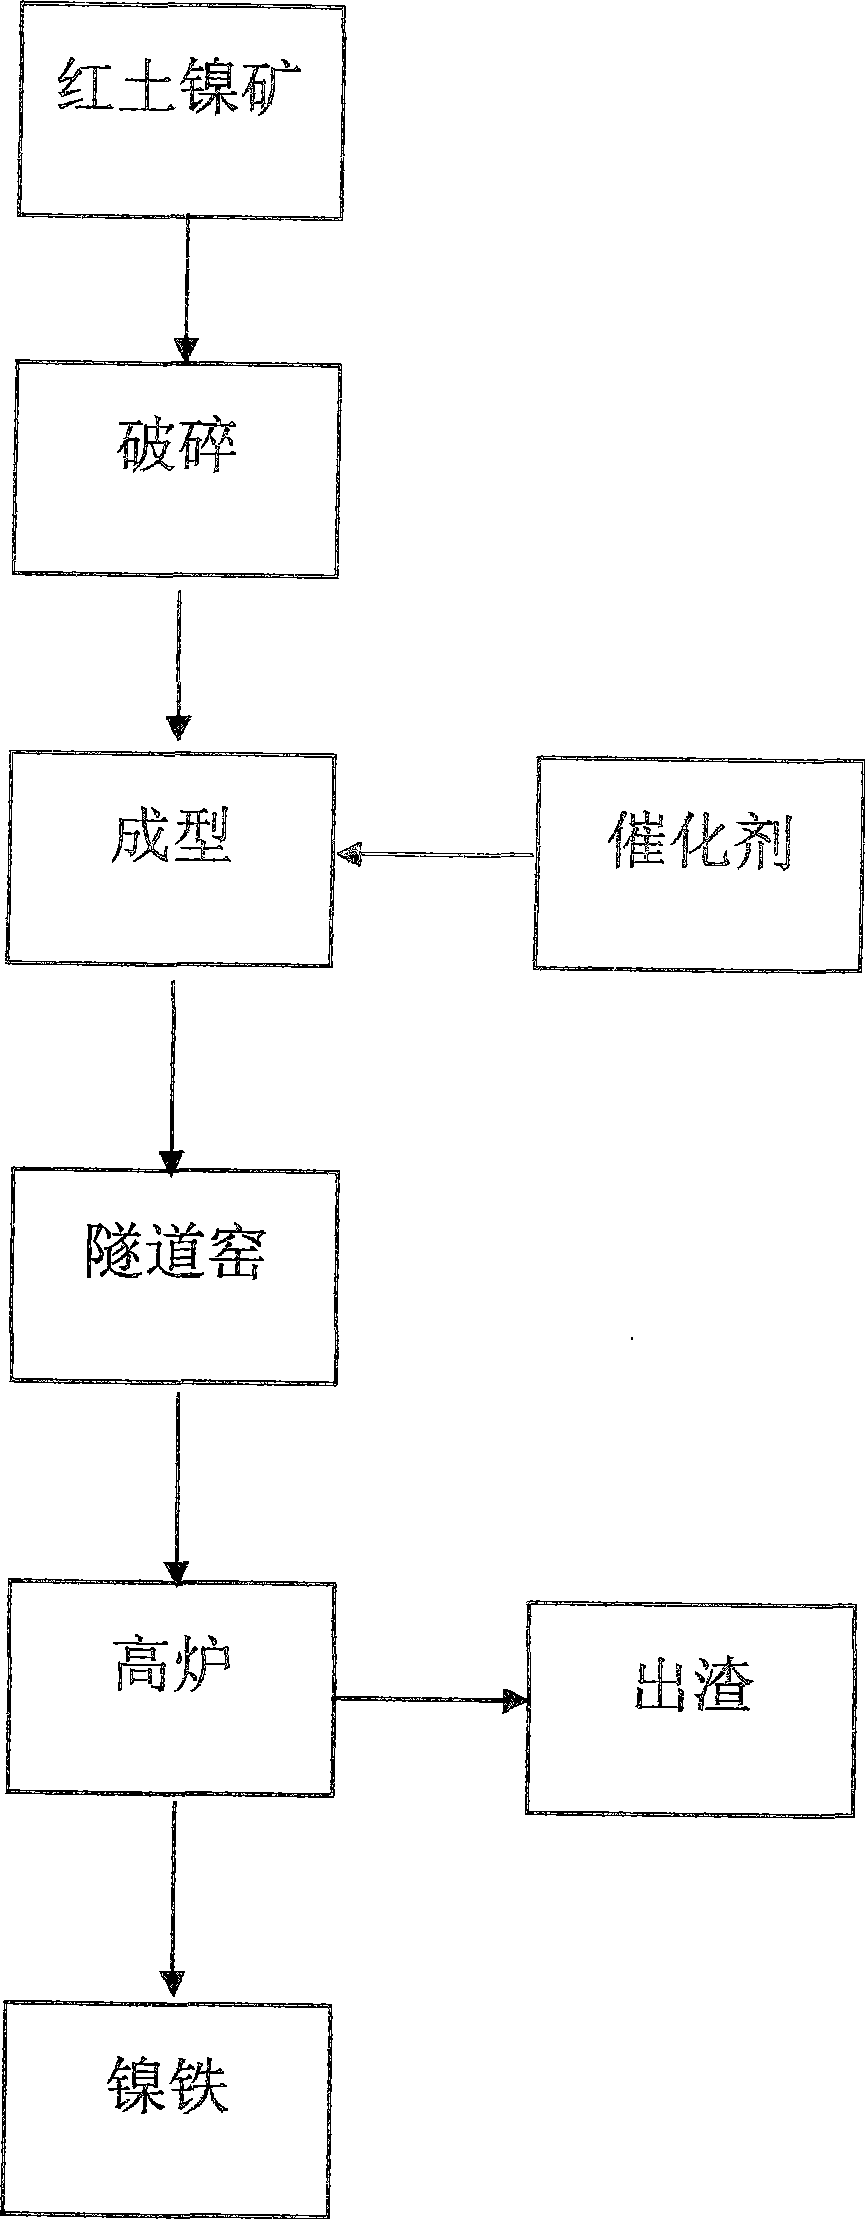 Method for jointly producing ferronickel in tunnel furnace-blast furnace from lateritic nickel